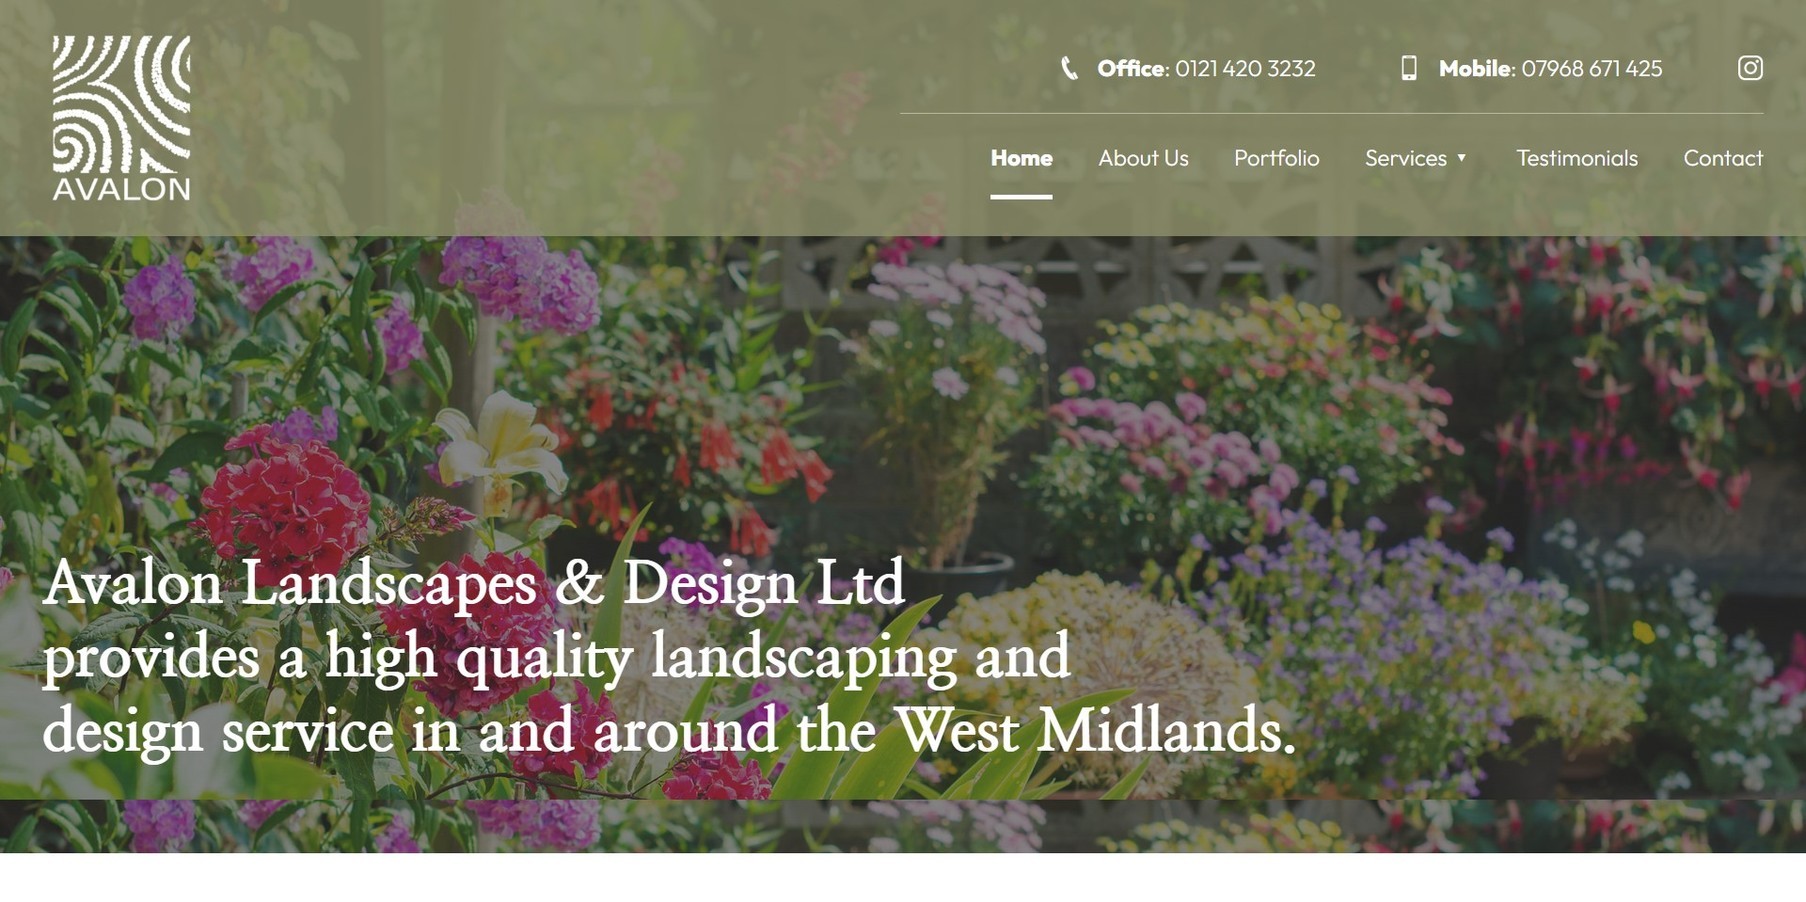 The new Express Lettings website from it'seeze